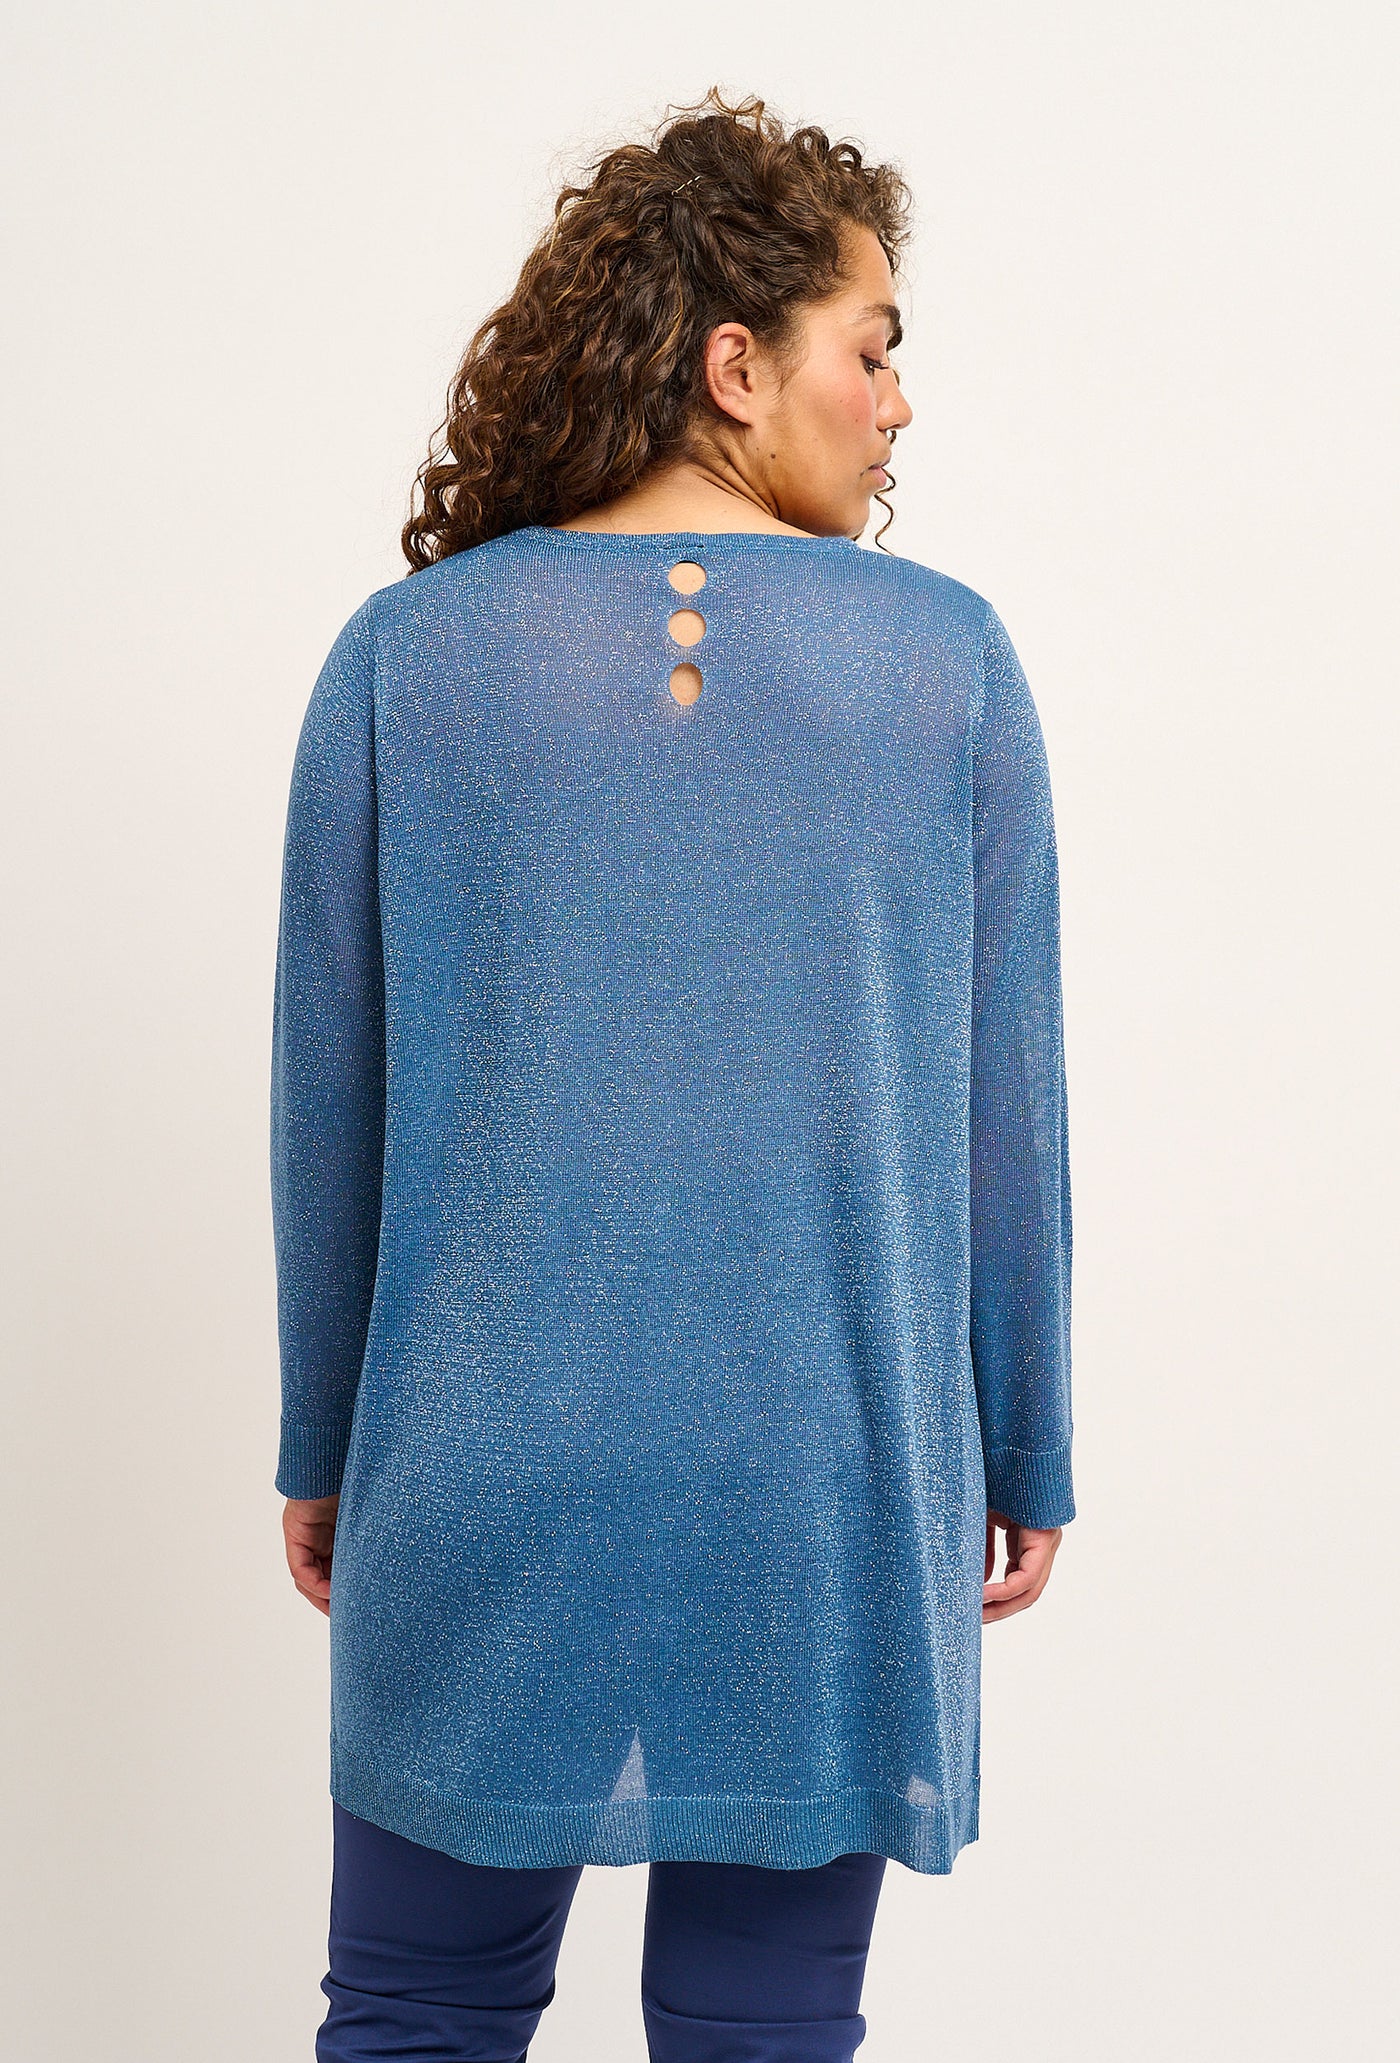 Adia ADSusanne Knit Pullover 4722 Federal Blue